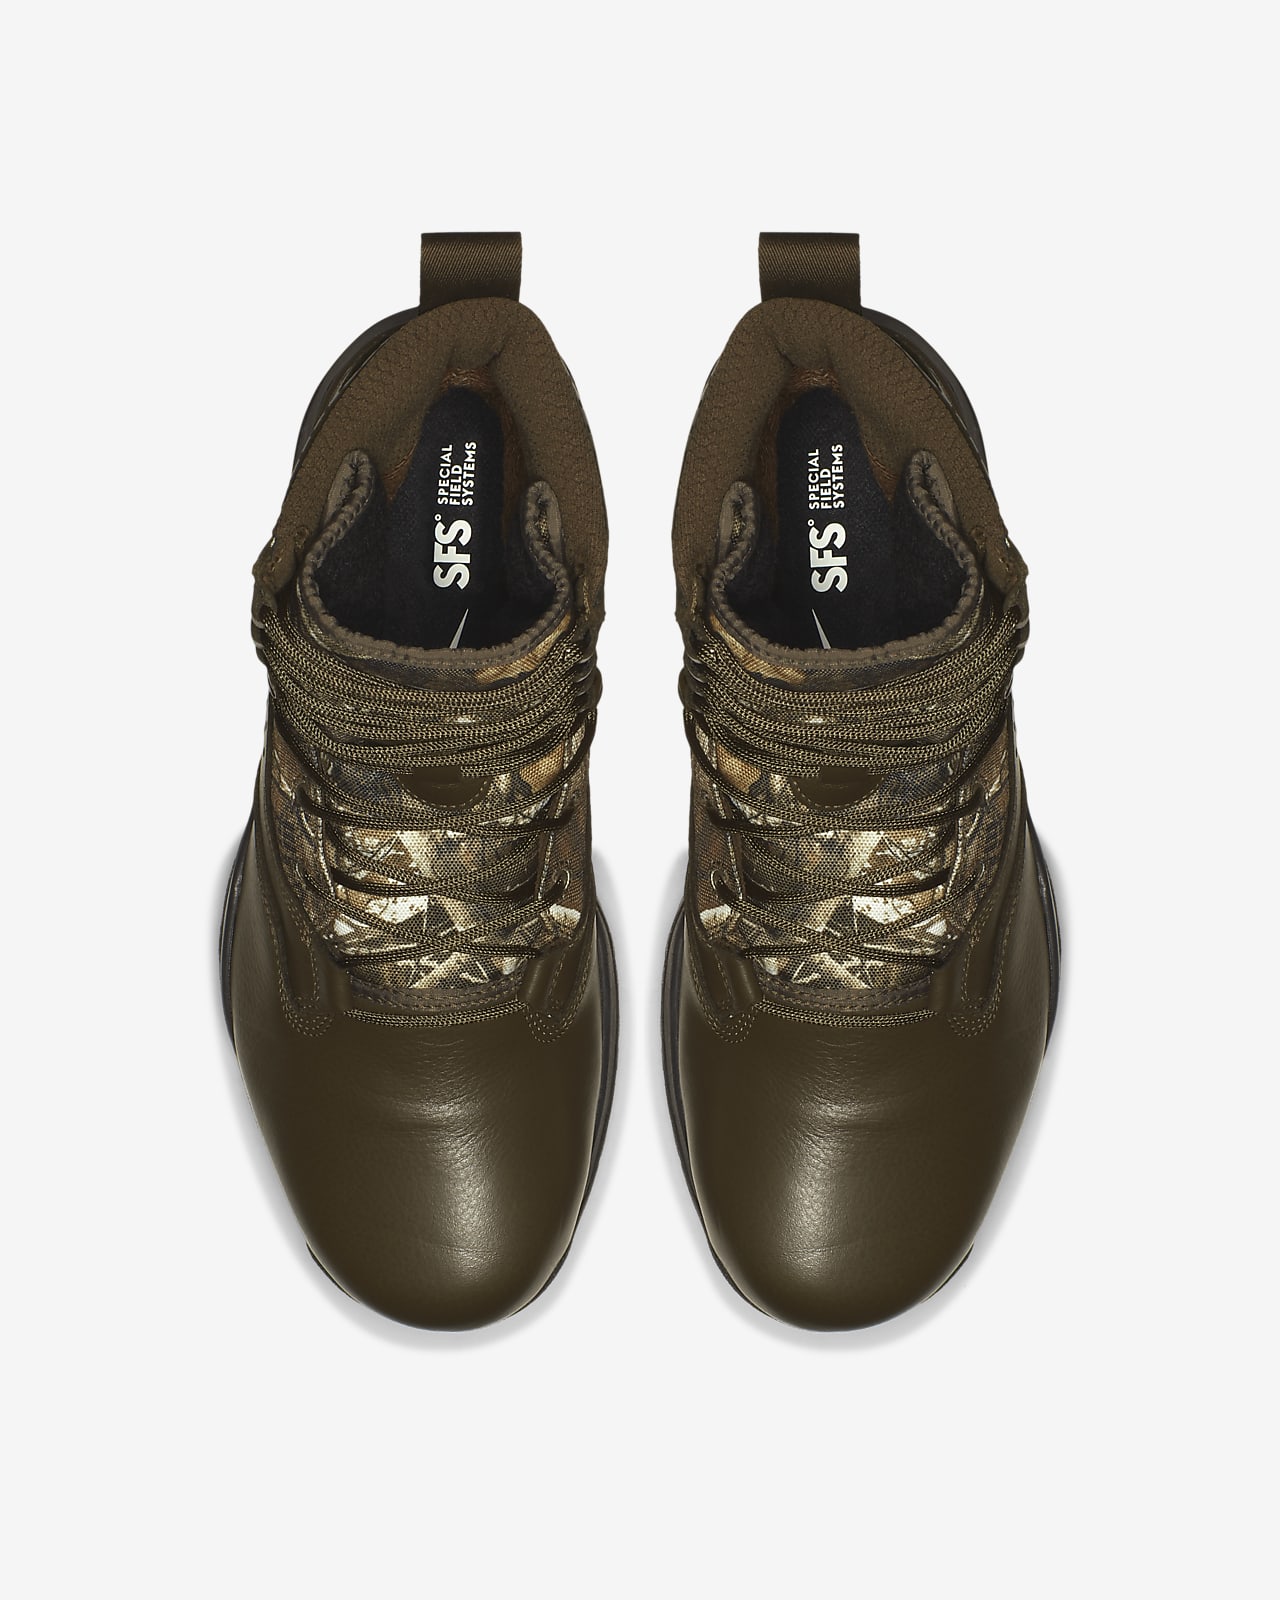 nike boots tactical